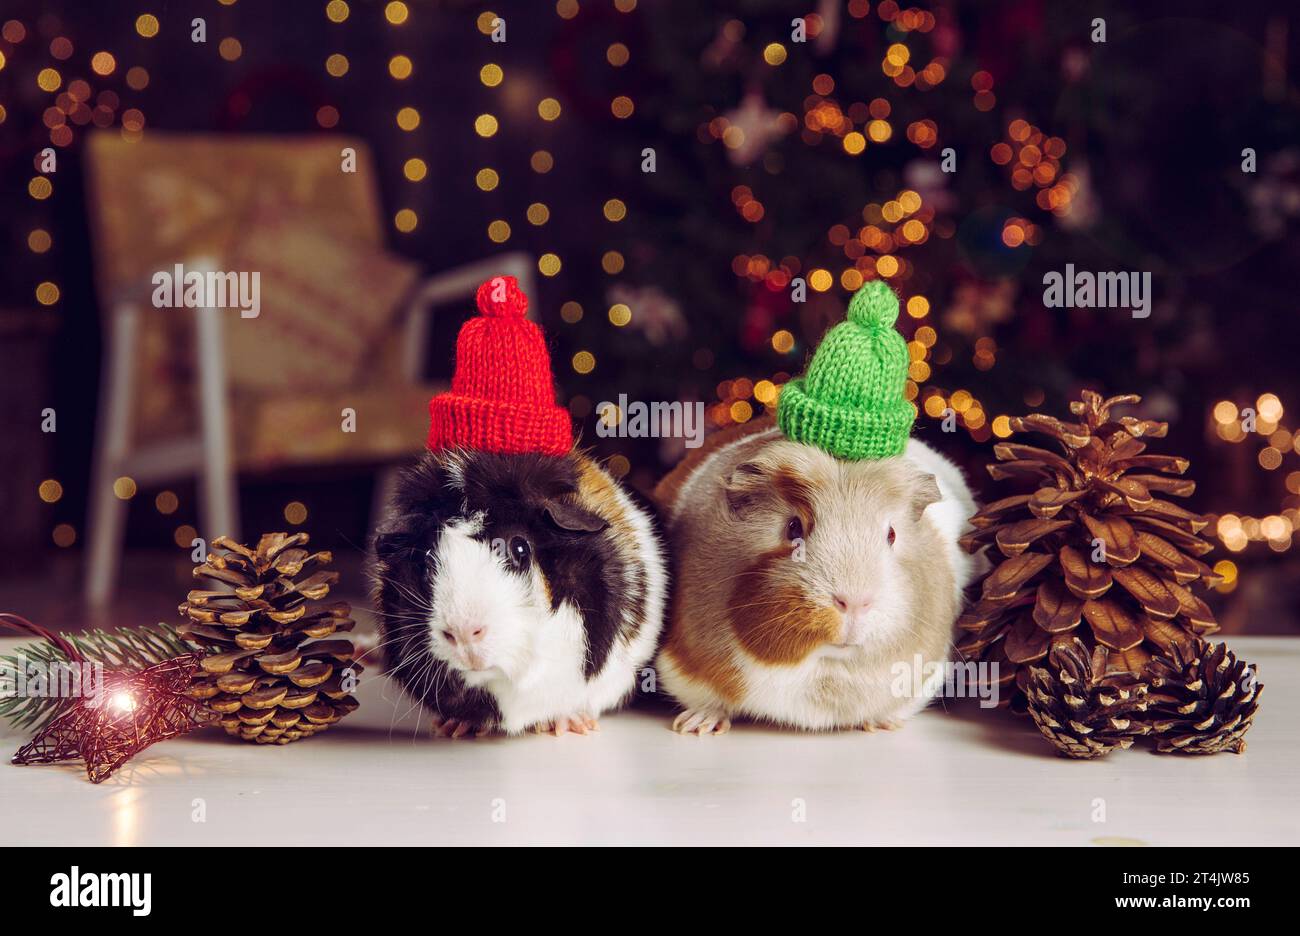 Two cute little Domestic guinea pigs (Cavia porcellus), also known as cavy or domestic cavy on Christmas lights background indoors in winter. Stock Photo